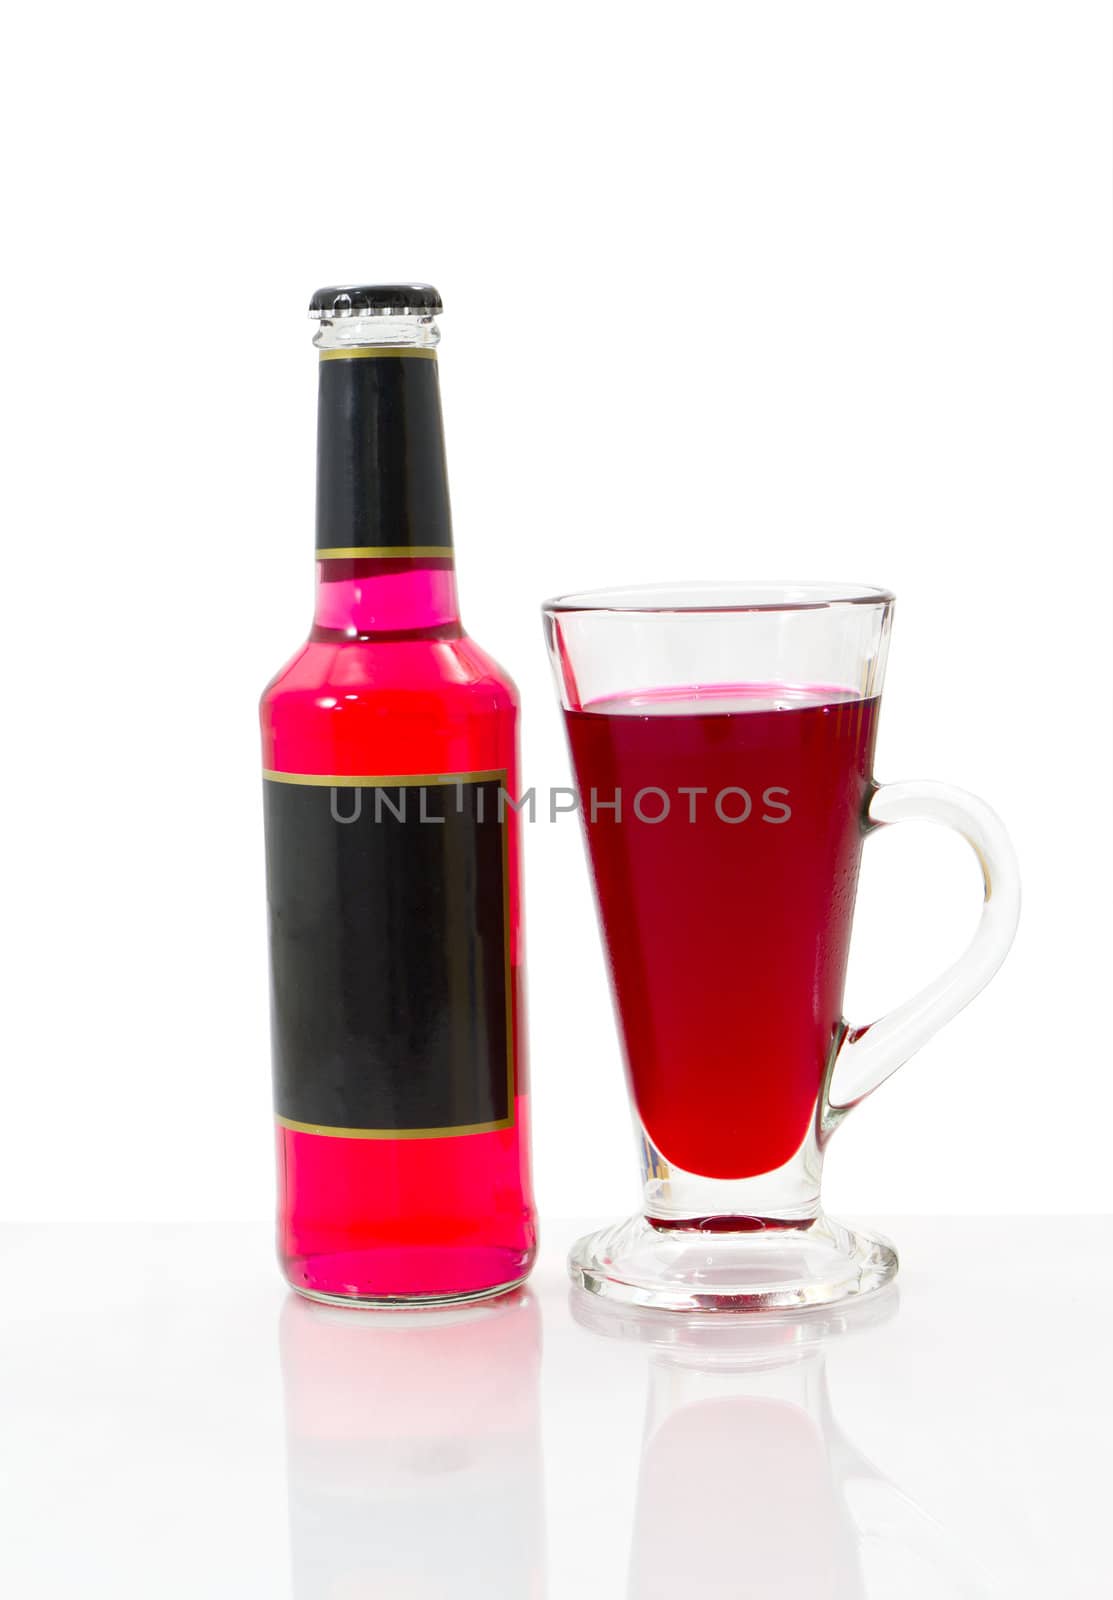 Red wine bottles and wine glass isolated on white.